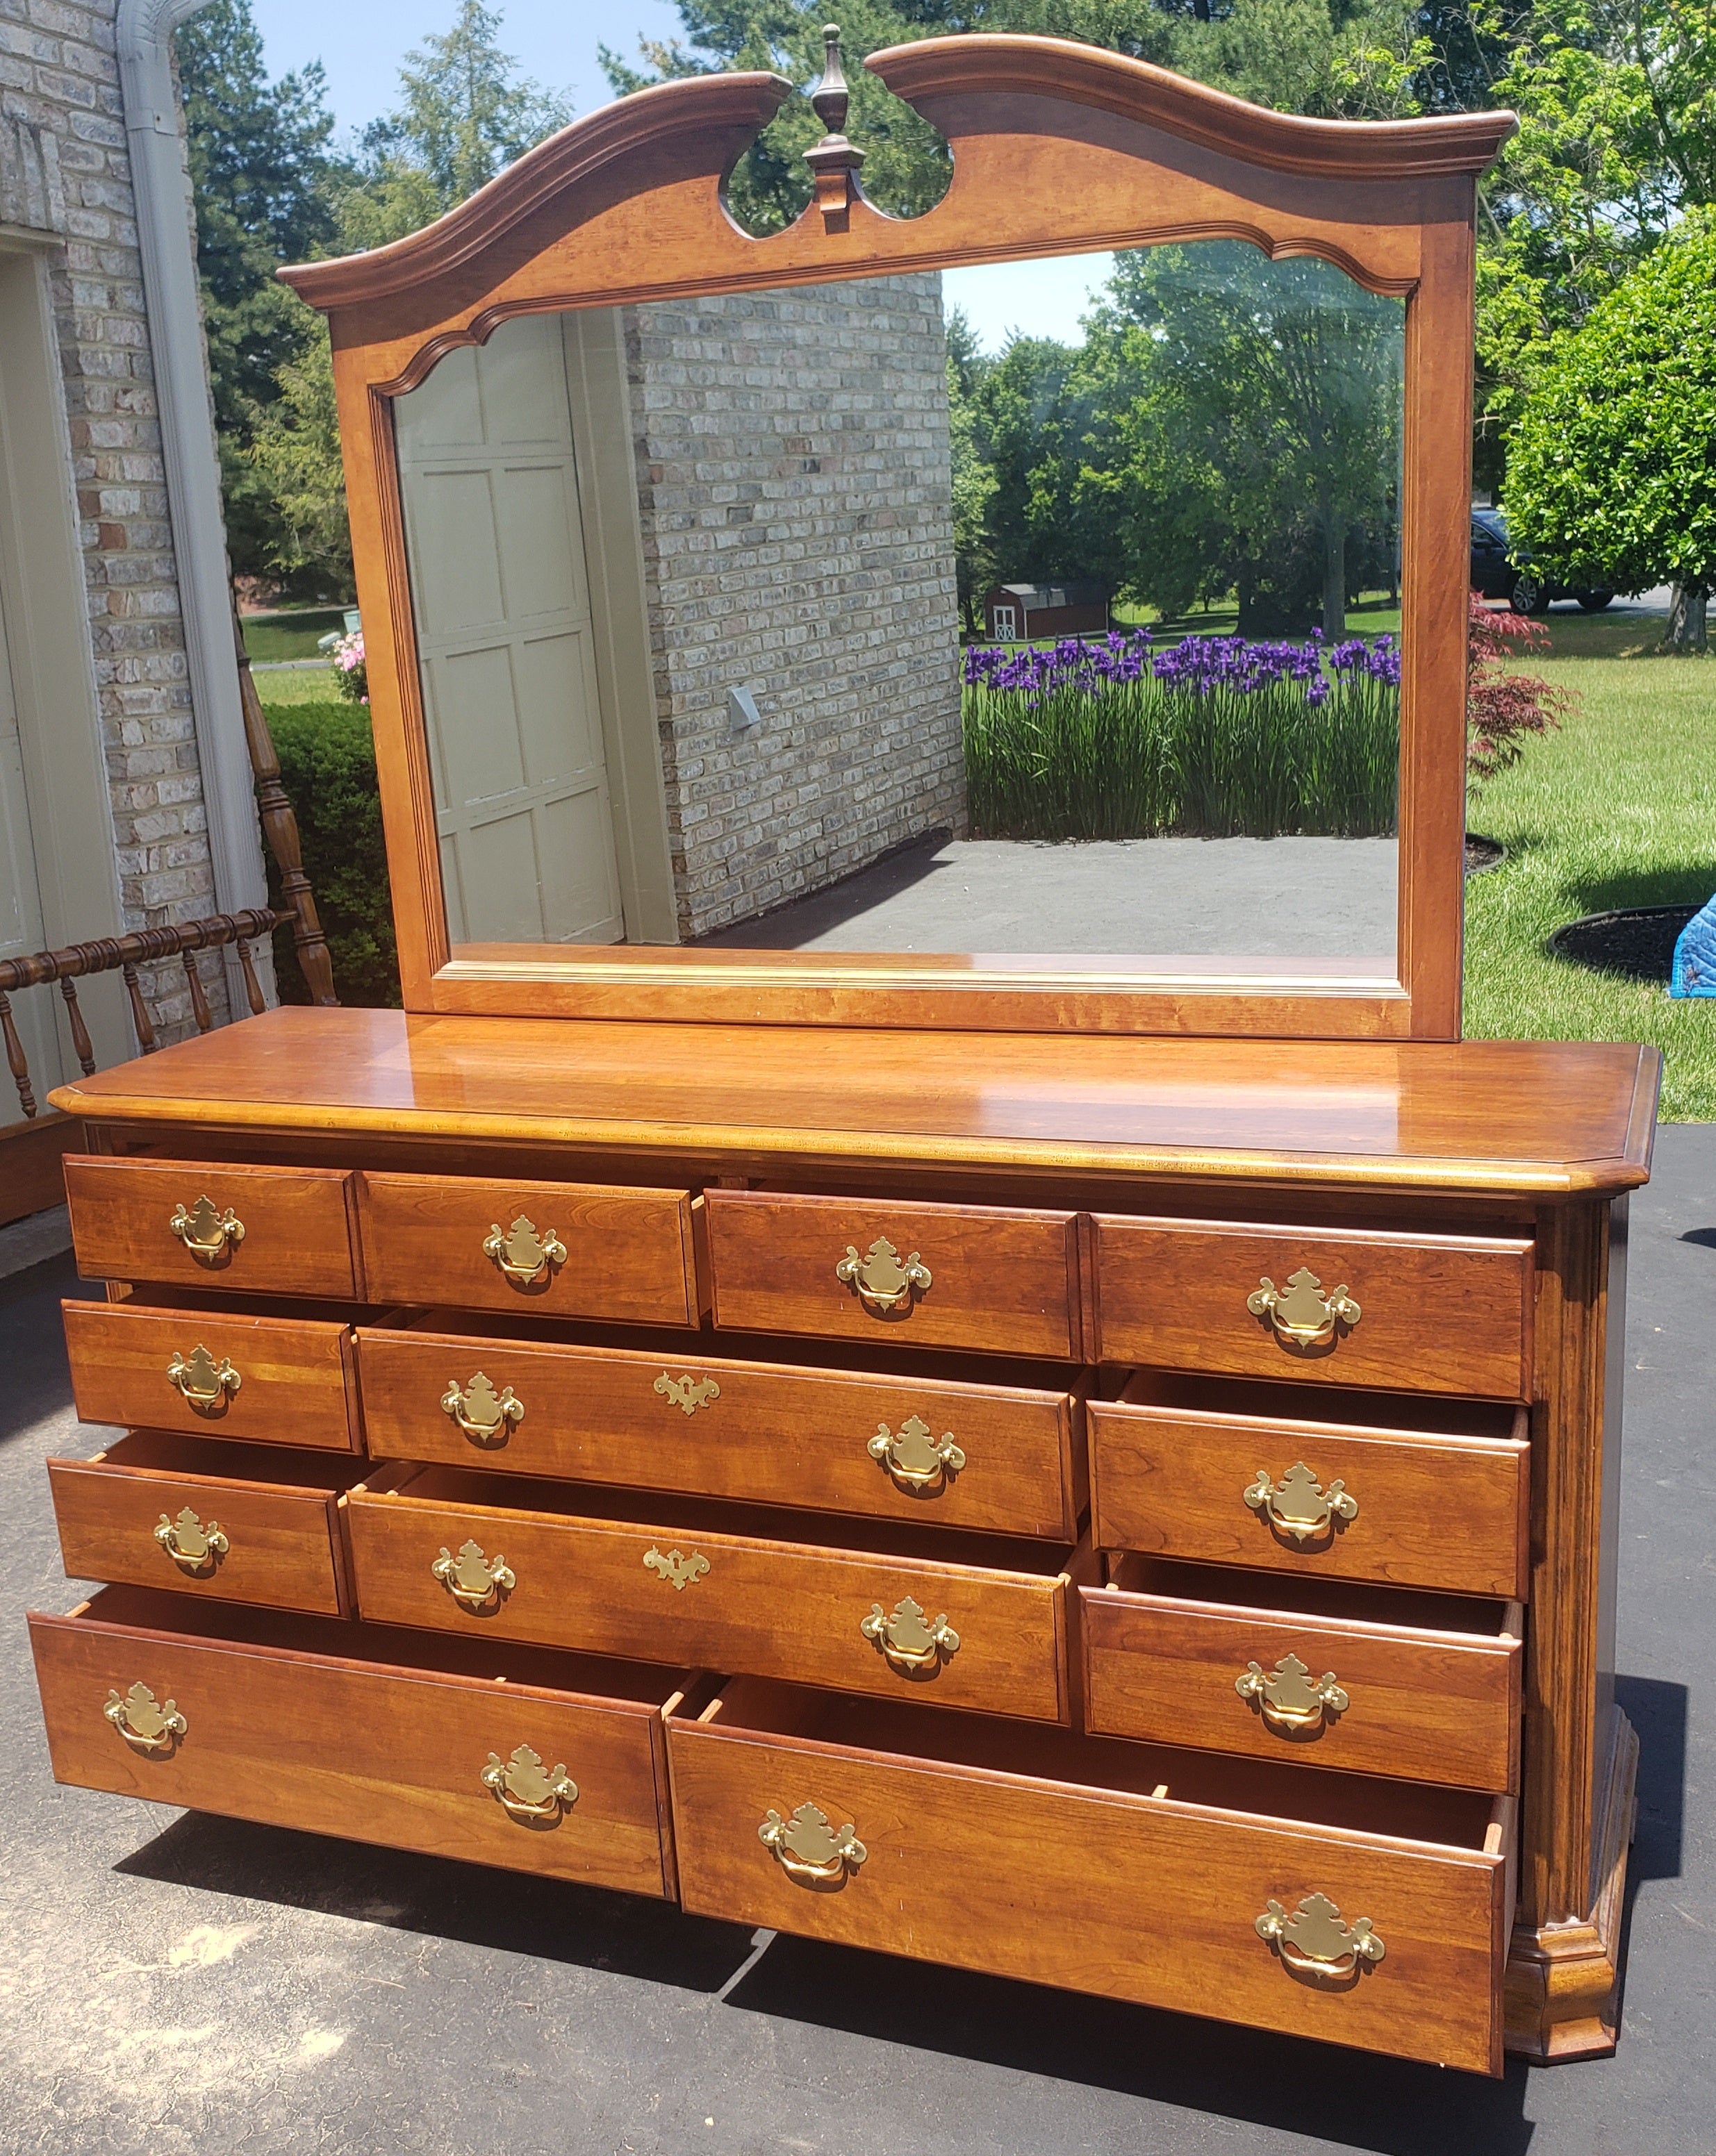 Stanley Furniture American Craftman Collection Chippendale Cherry dresser with mirror.
Very good vintage condition. Solid cherry with smoothly operating dovetailed drawers.
Mirror measures 41